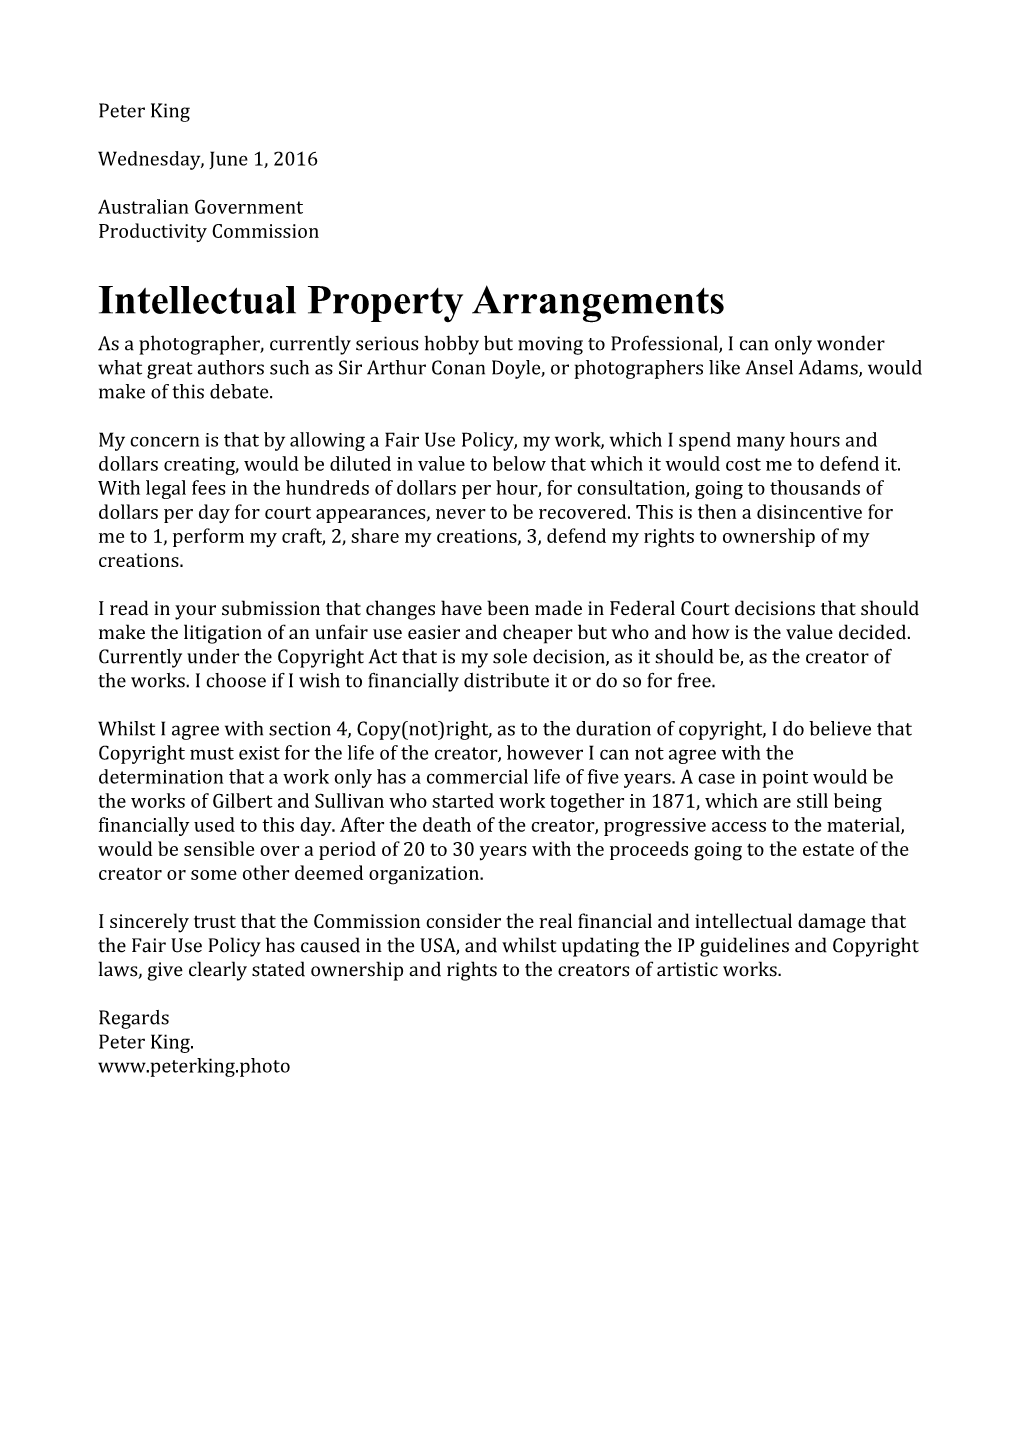 Submission DR275 - Peter King - Intellectual Property Arrangements - Public Inquiry